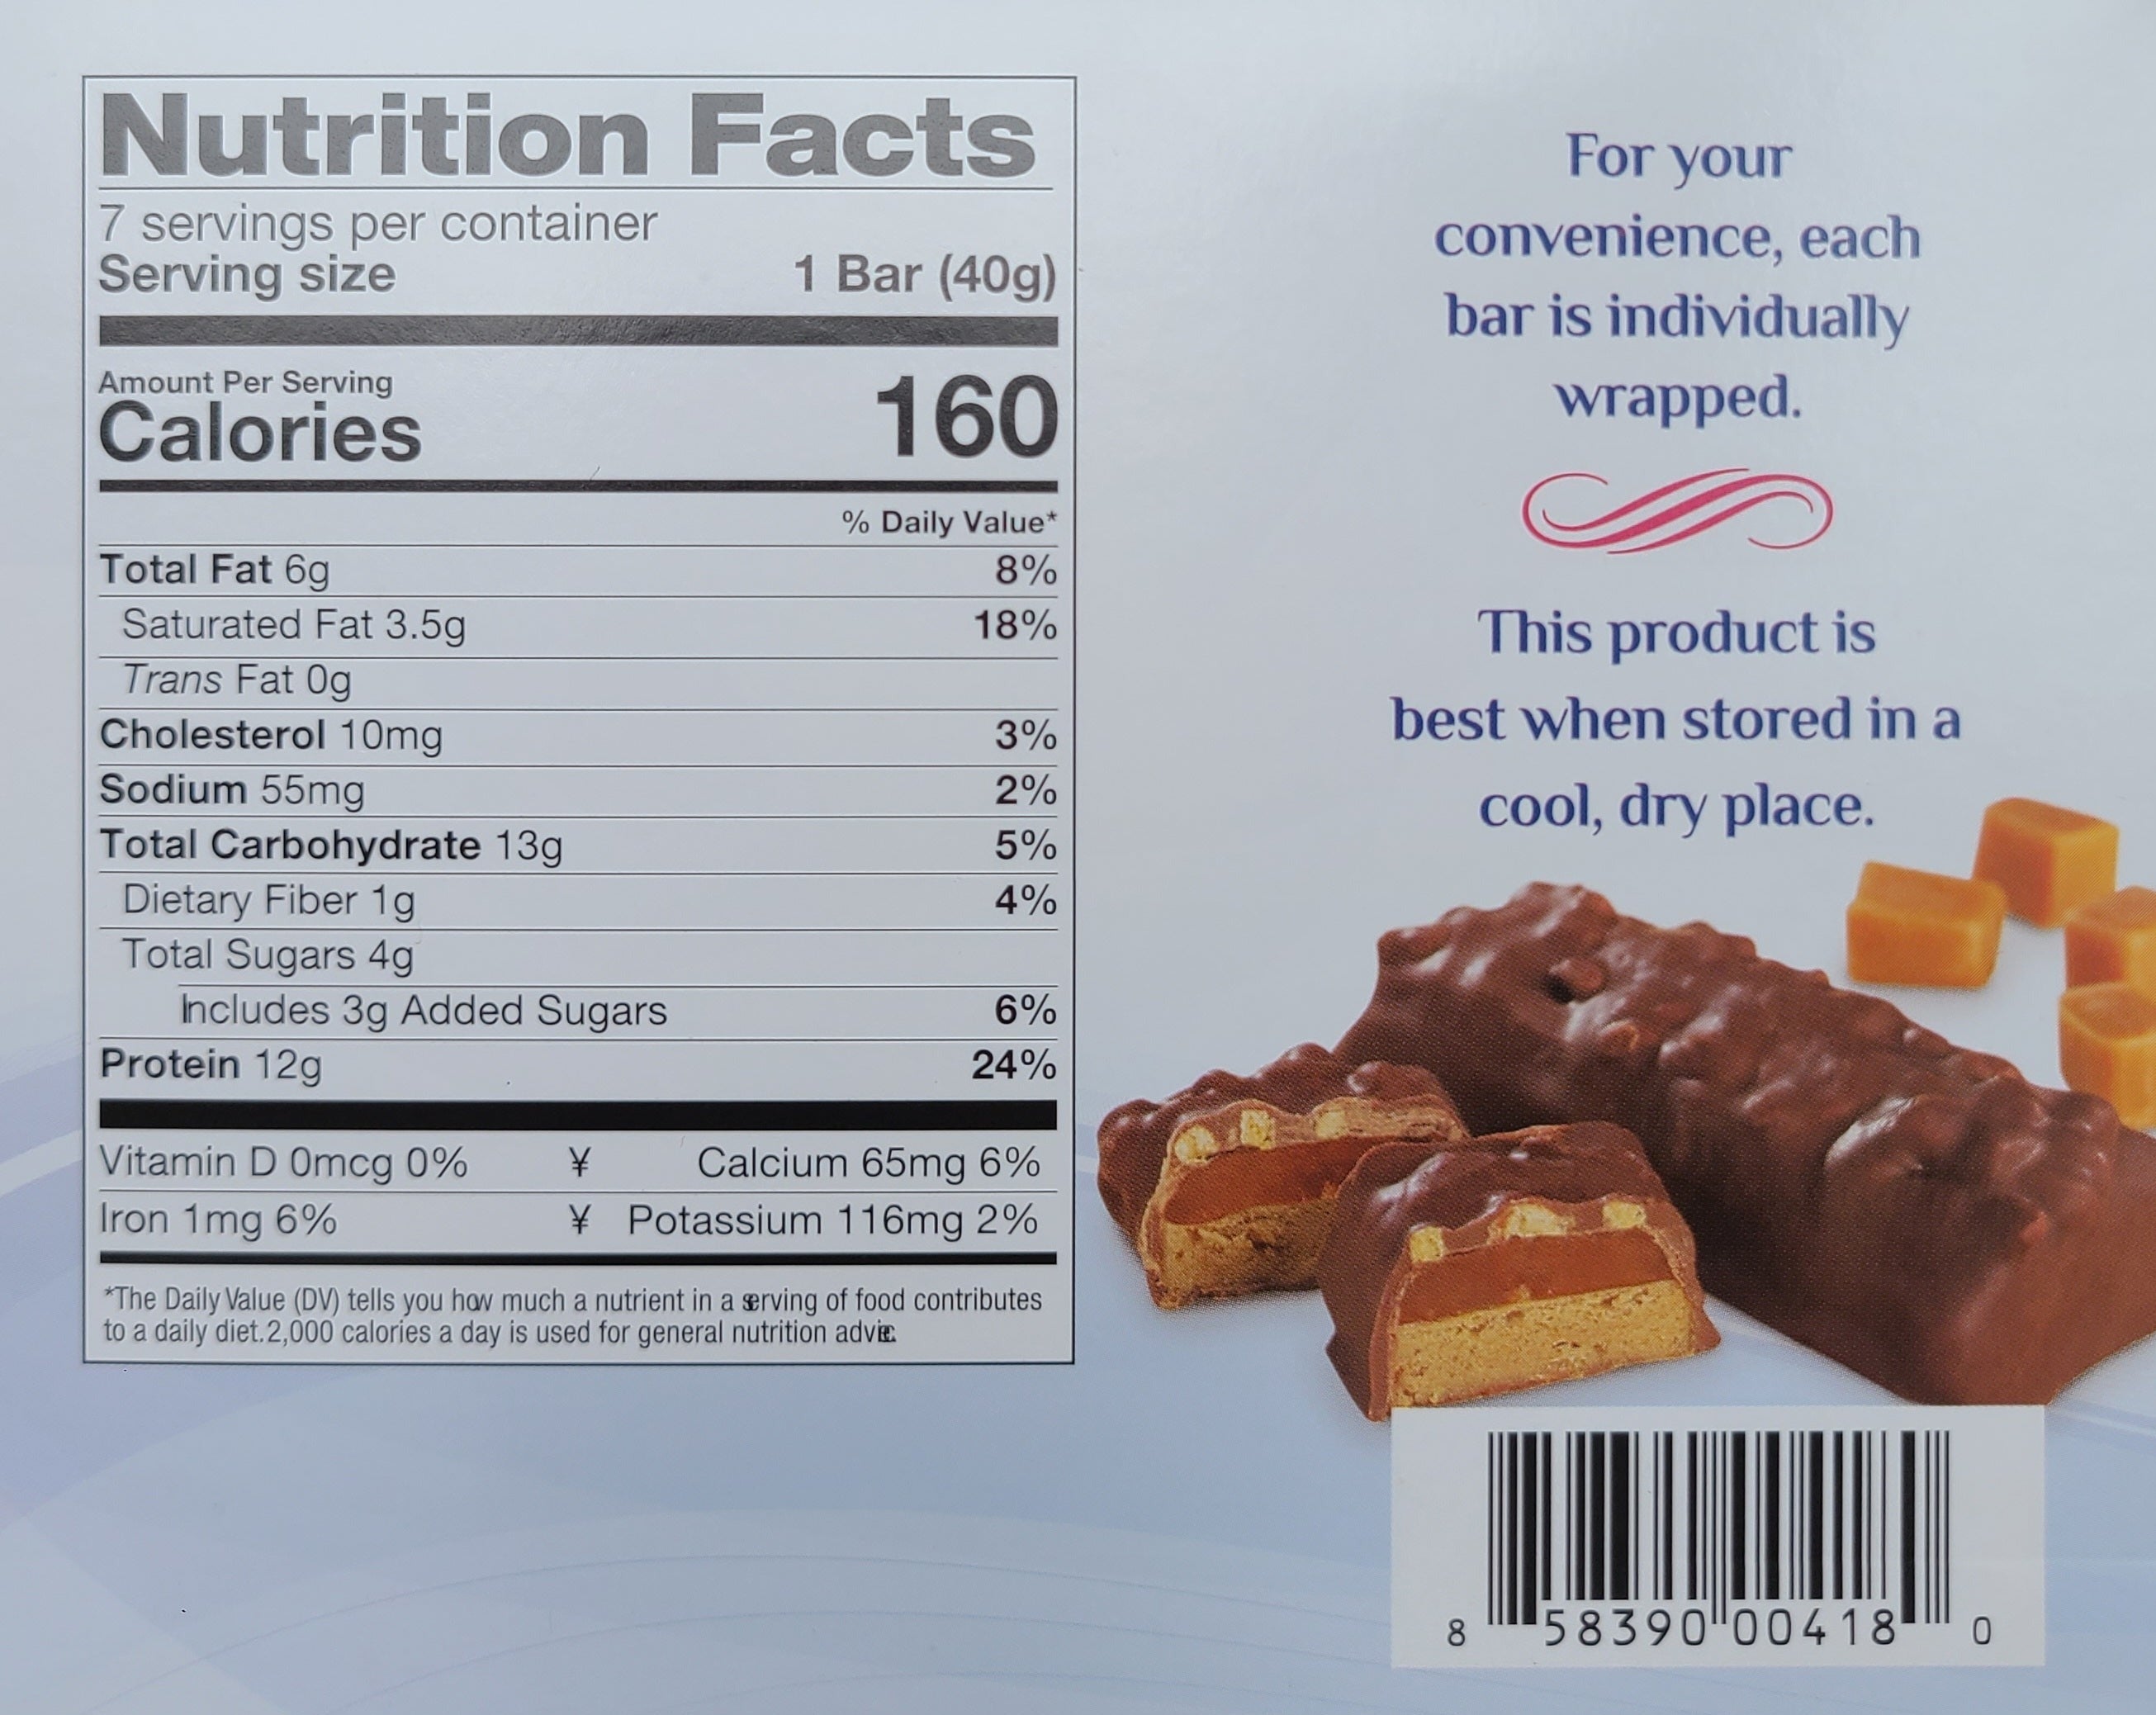 Product Review: Weight Watchers Salted Caramel Ice Cream Candy Bars